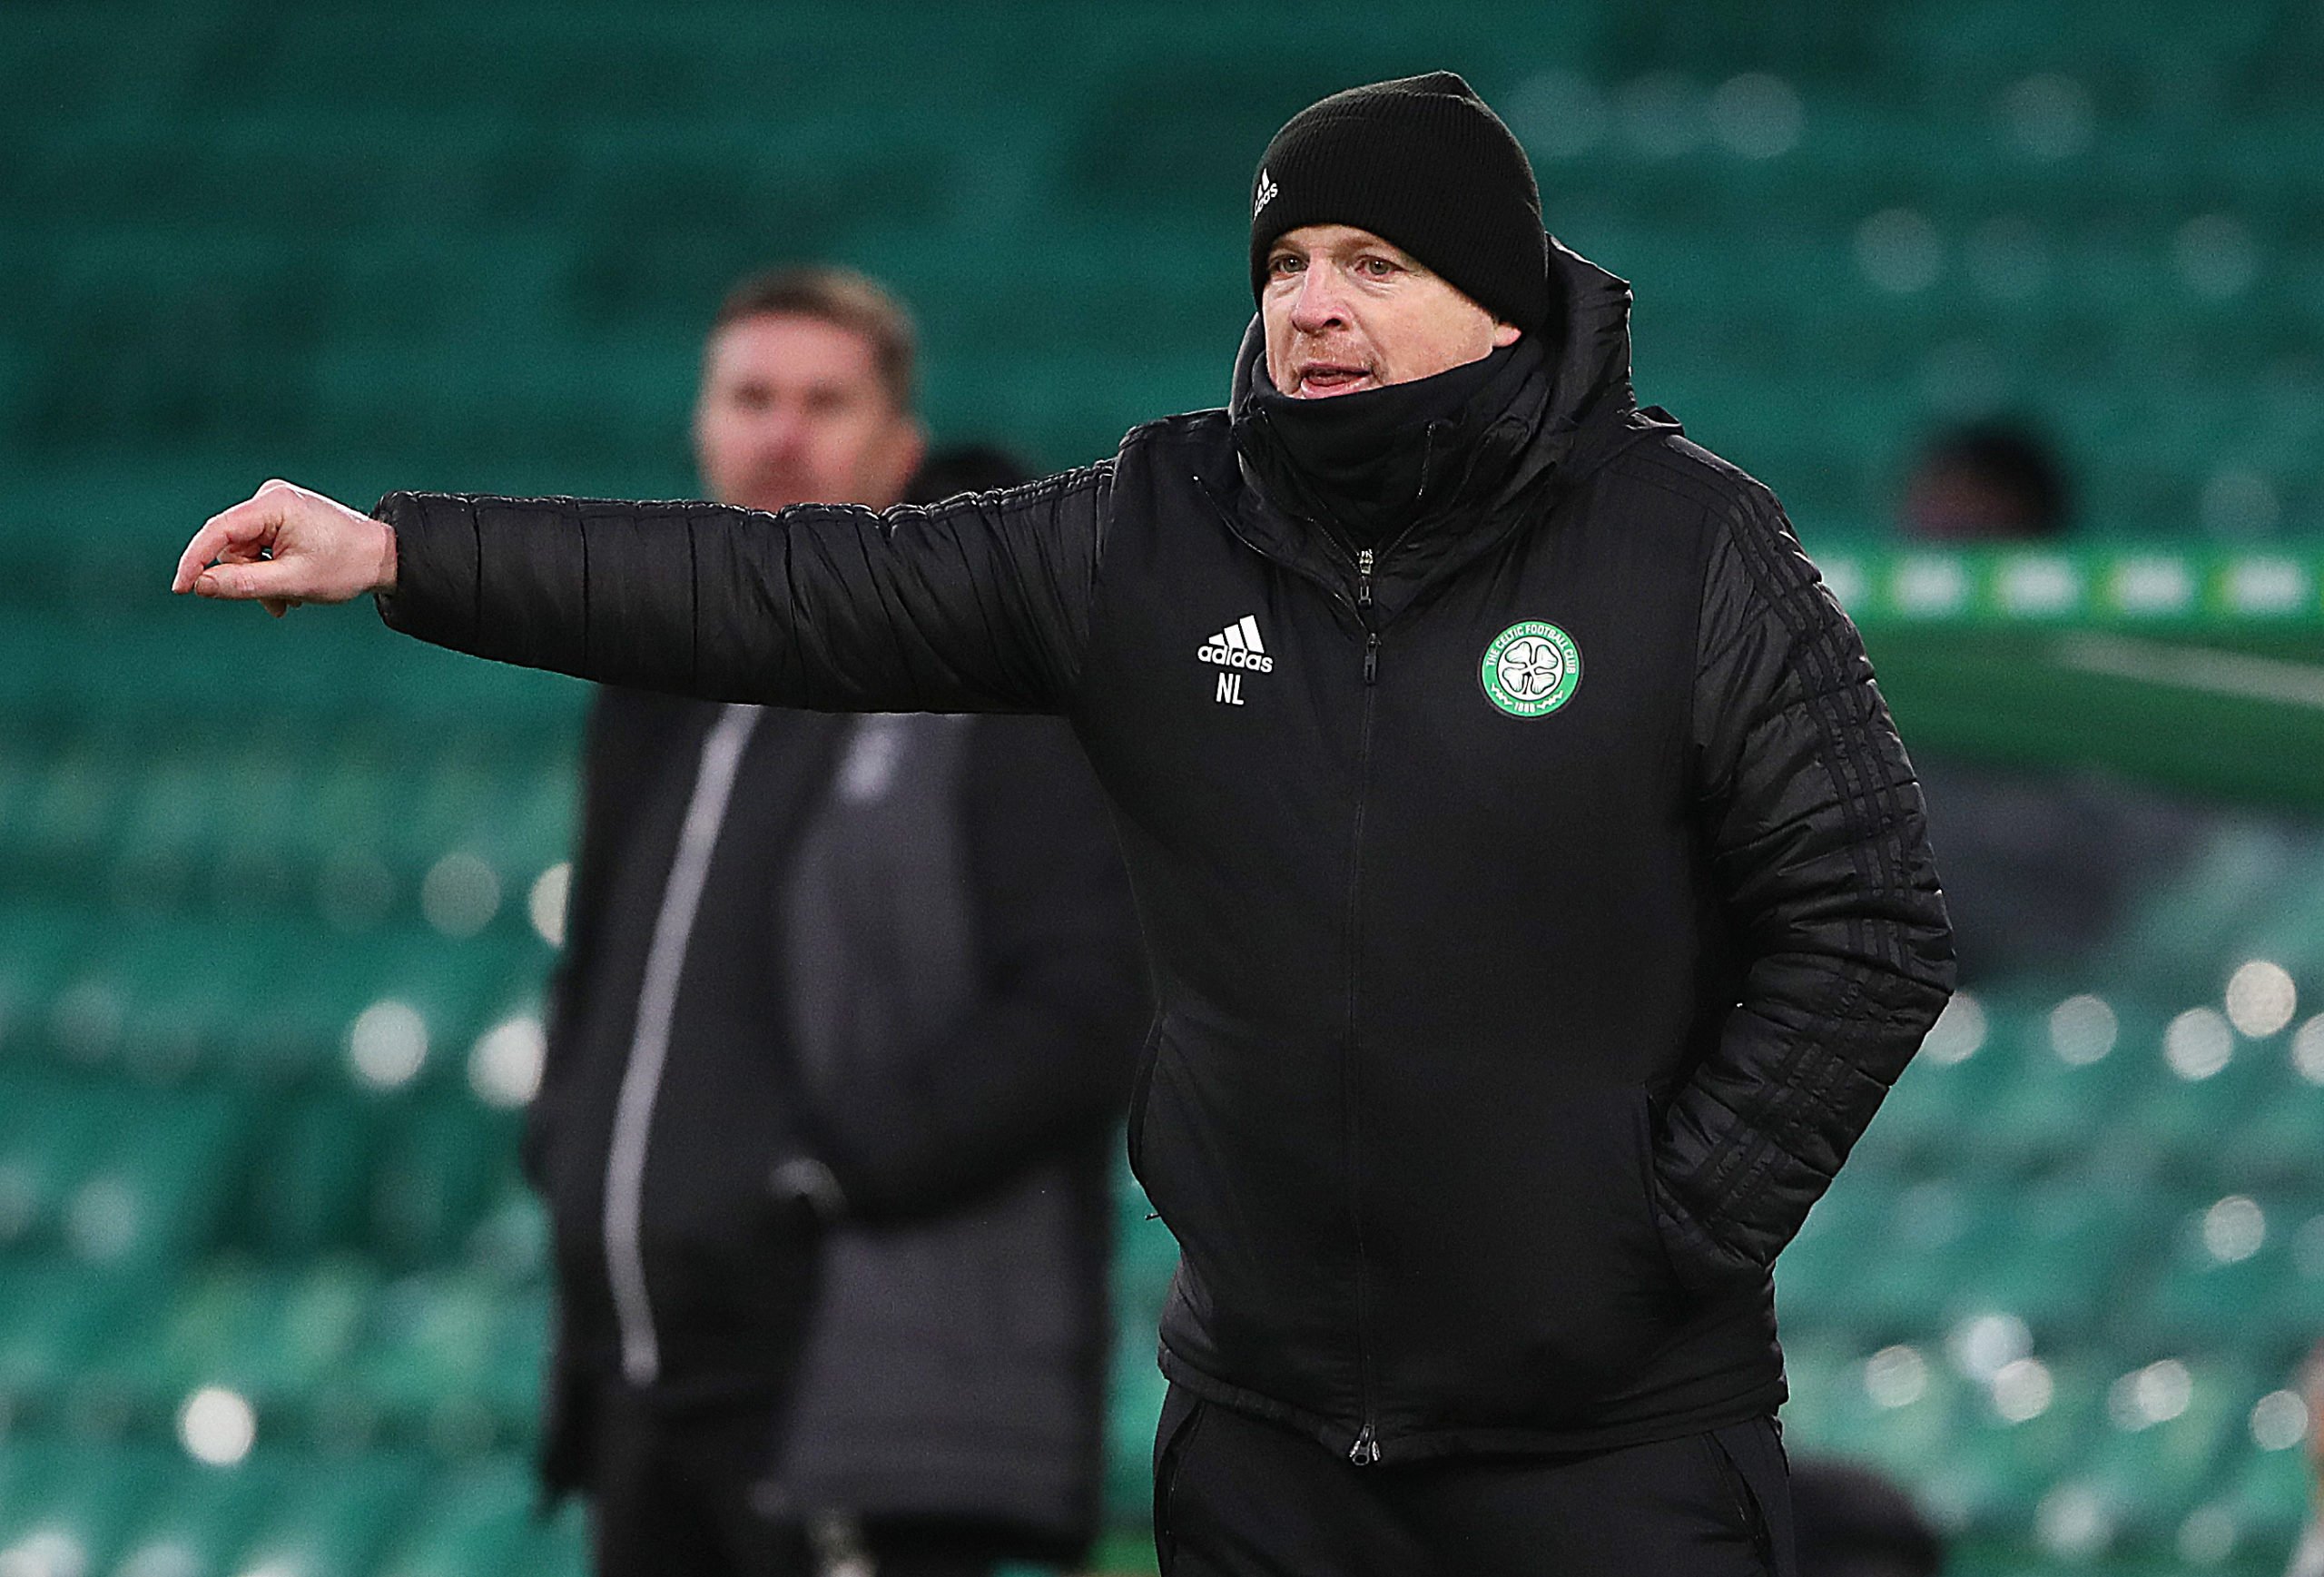 Celtic boss Neil Lennon agrees with "astonished" Michael Stewart on worrying precedent